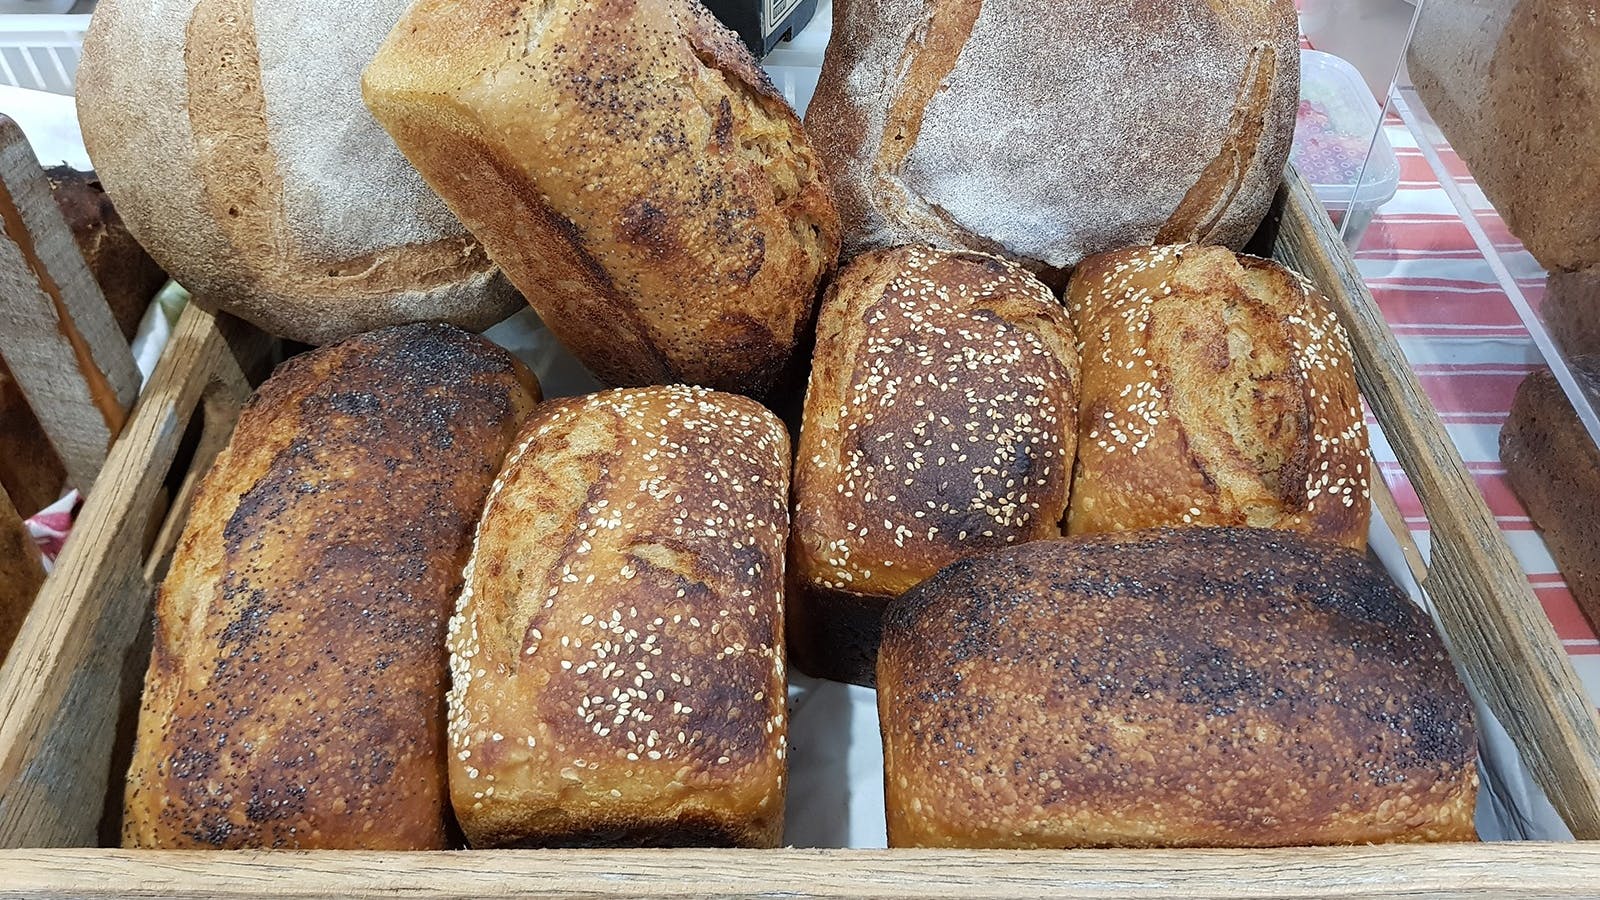 Sample of the freshly baked sourdough and rye breads from Small Grains Bakery